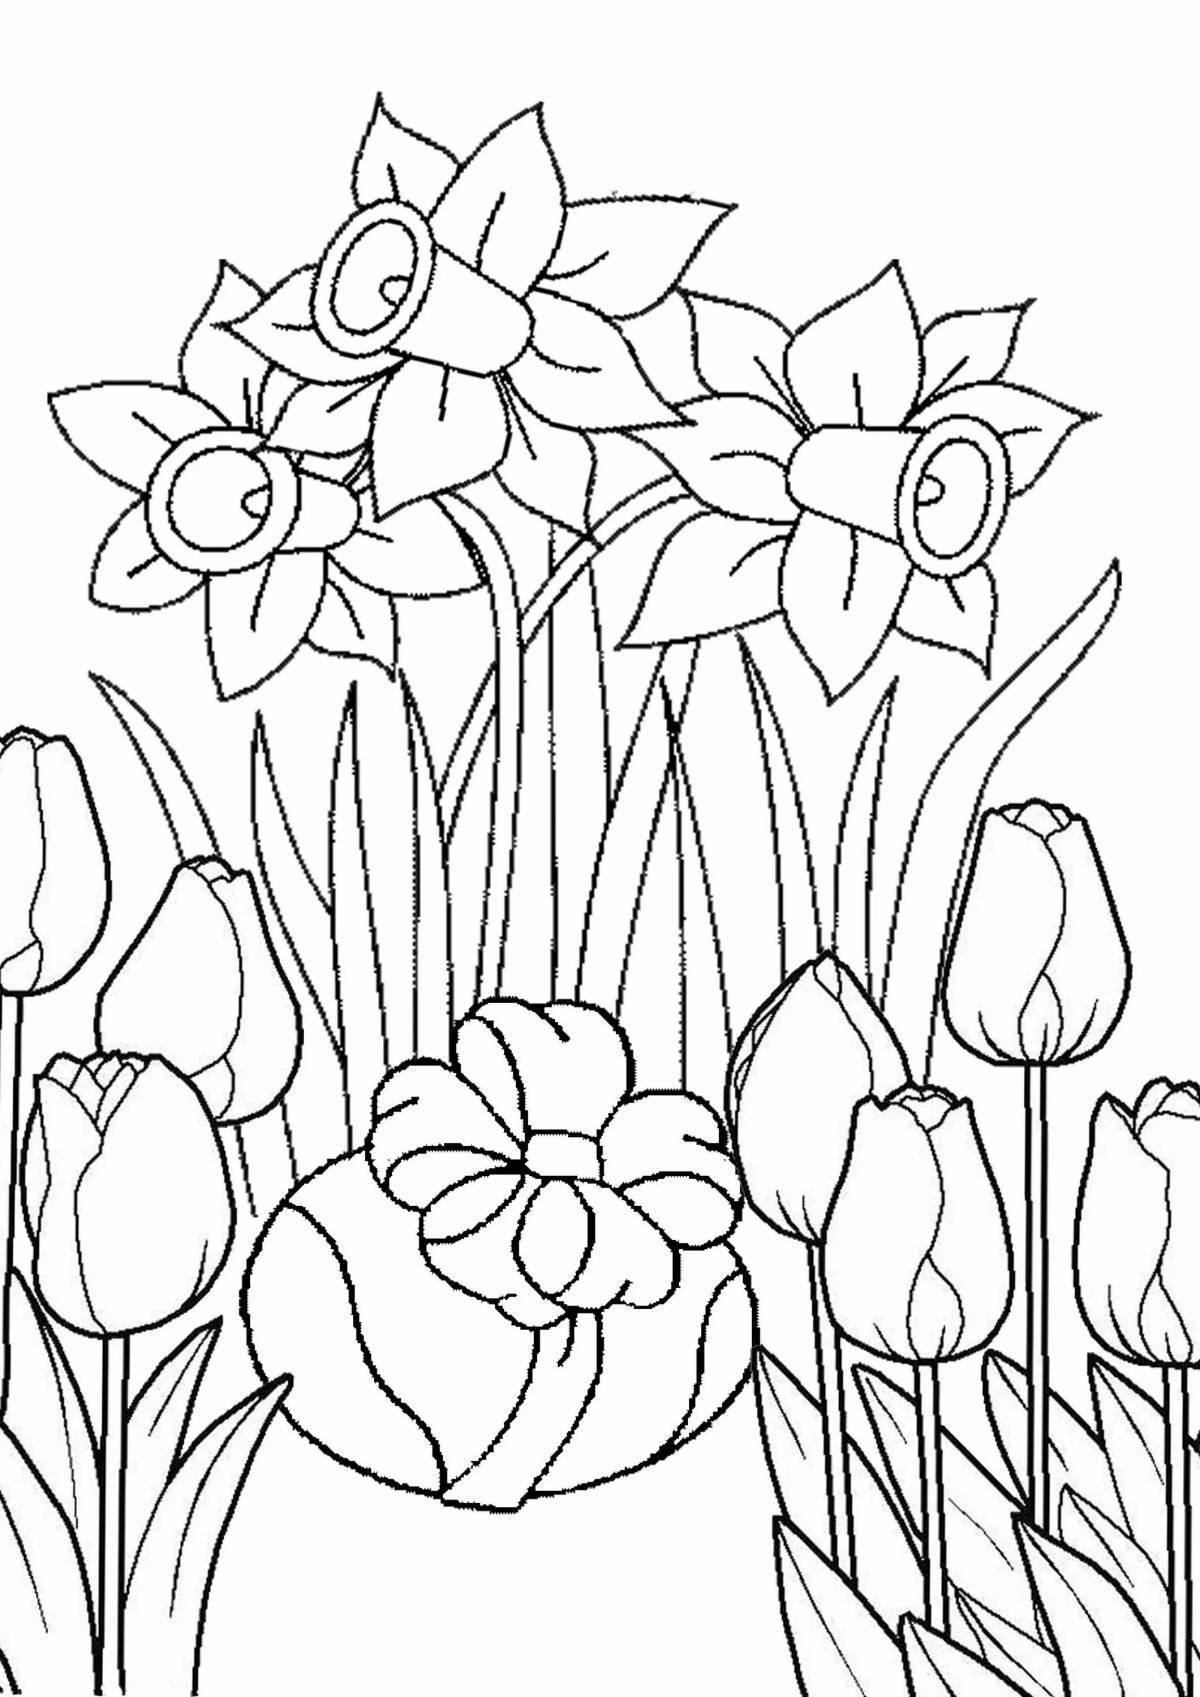 Coloring book glowing spring tulips